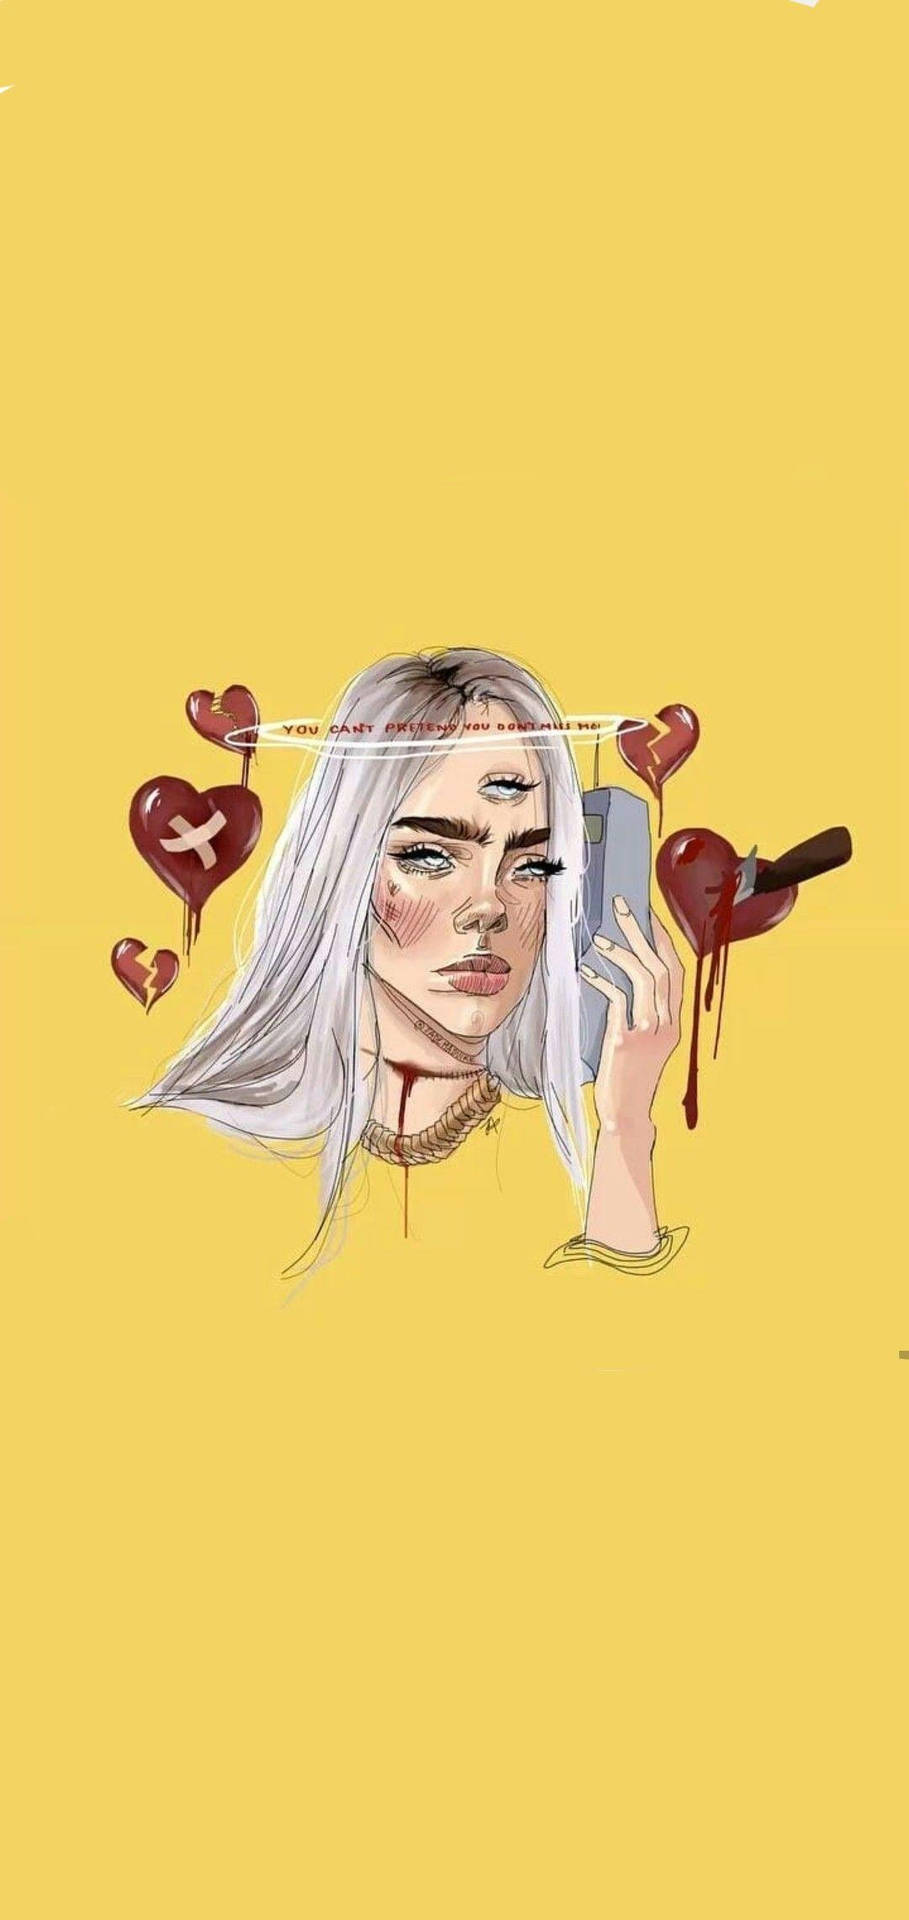 Baddie Cartoon Girl Surrounded By Broken Hearts Background